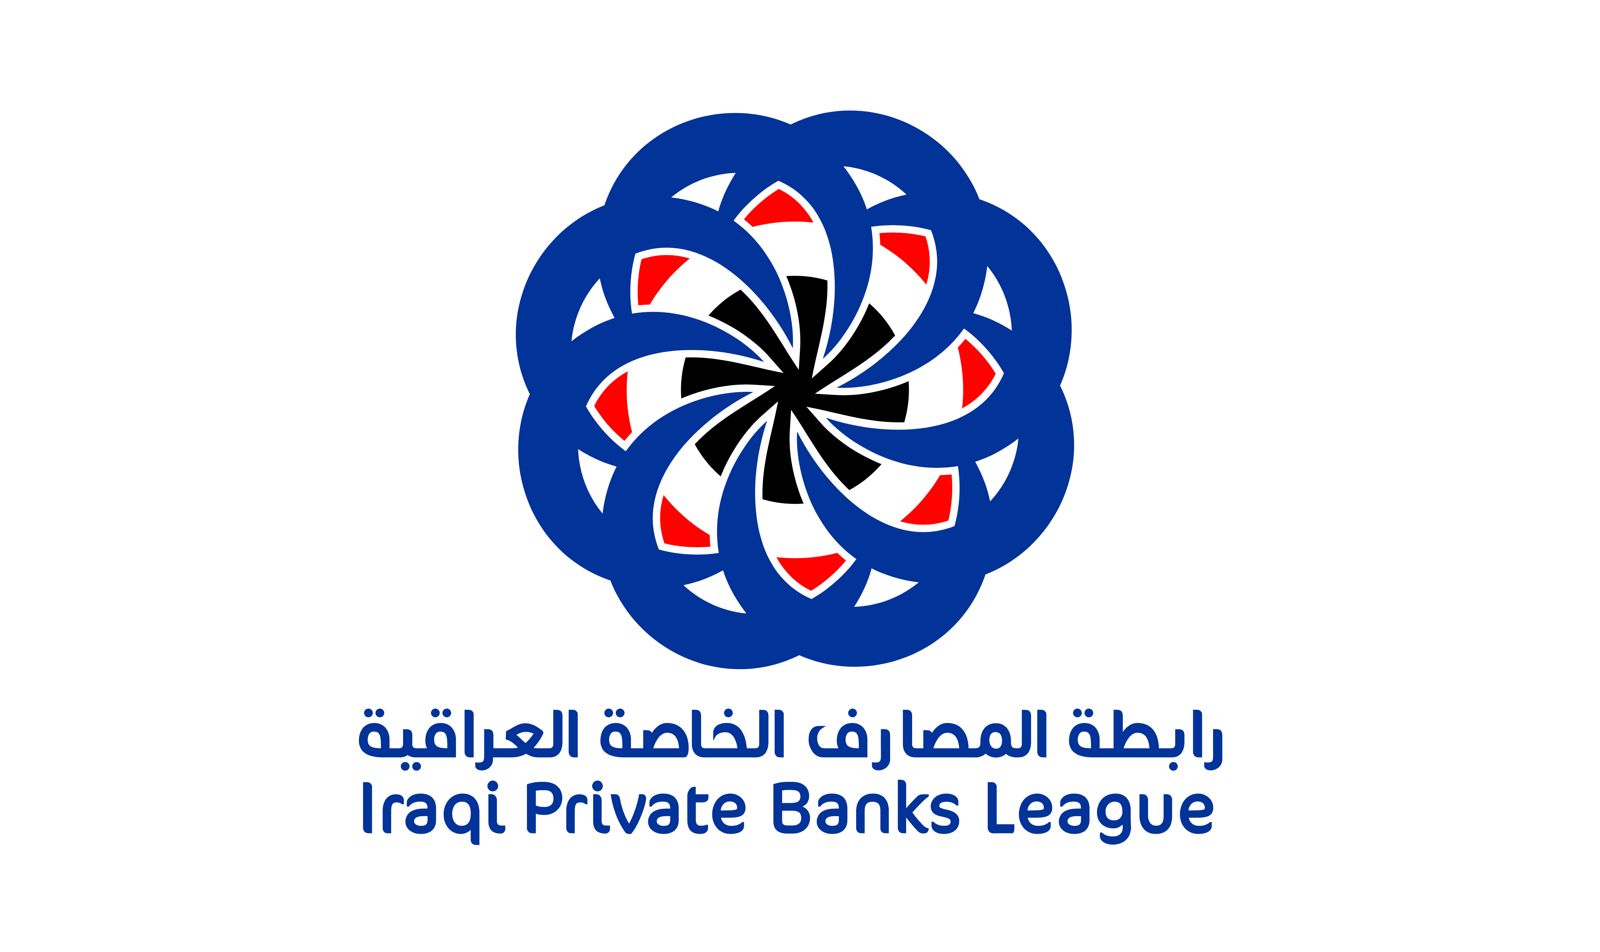 Private Iraqi banks established +1.2 million accounts in 9 months, official says